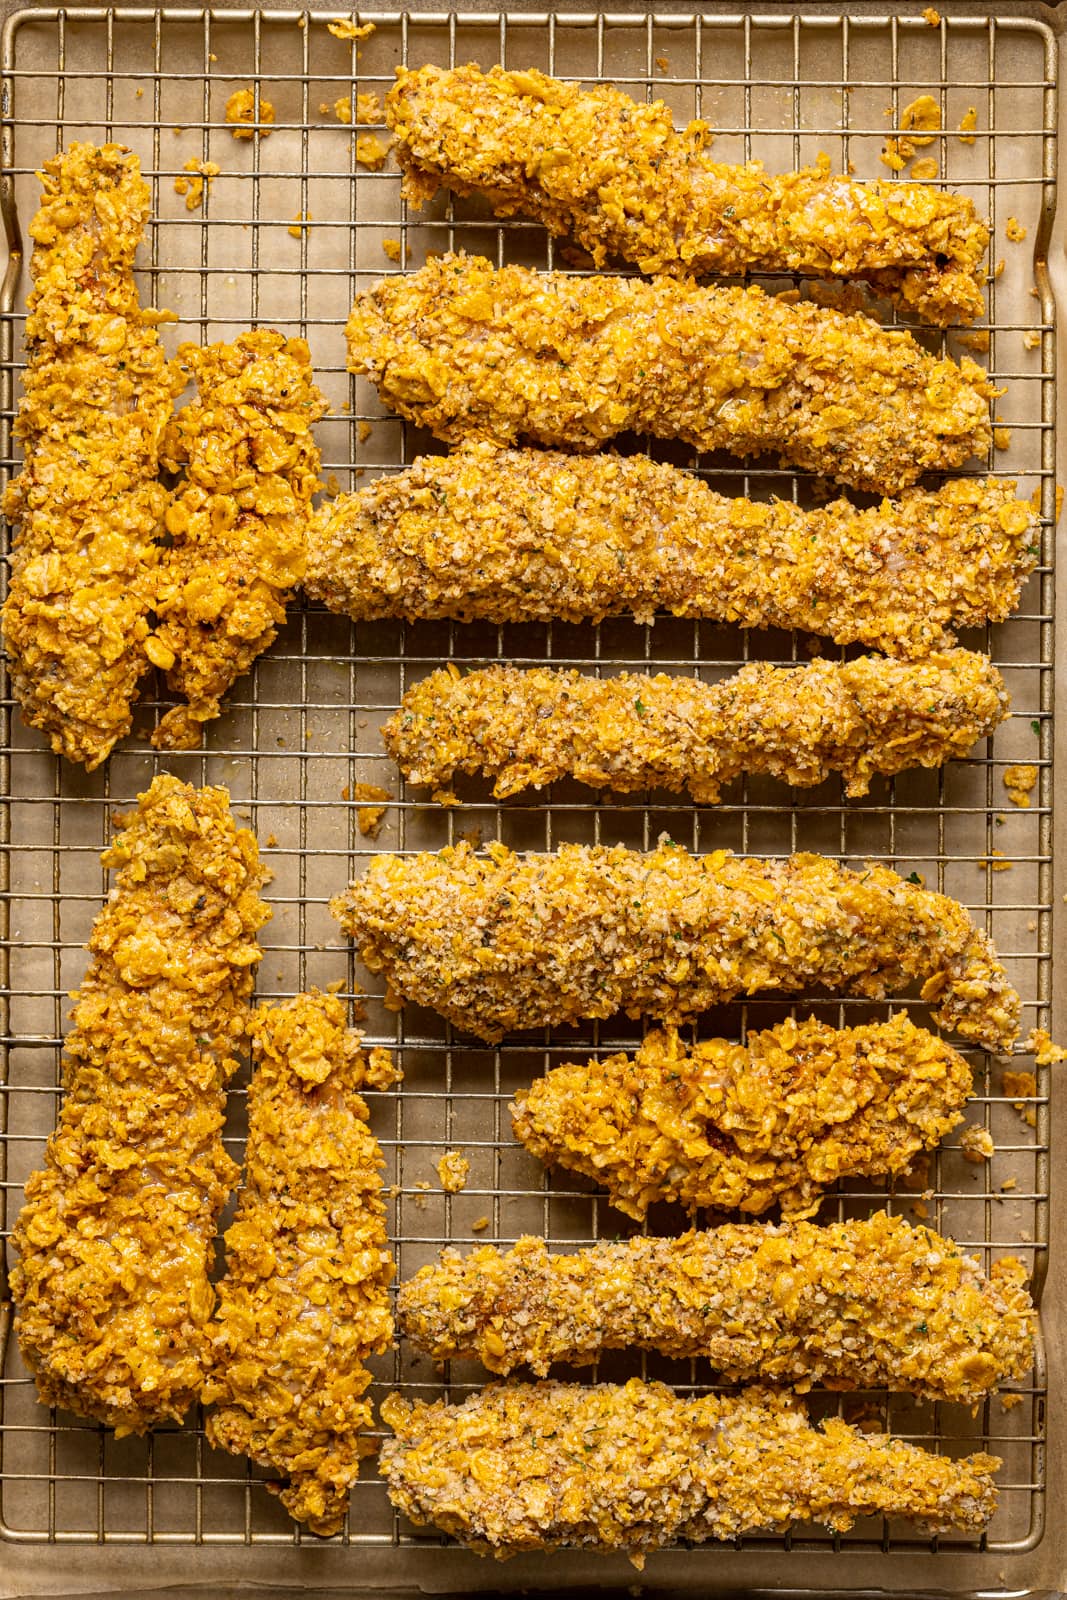 Chicken tenders on a baking sheet with a wire rack.